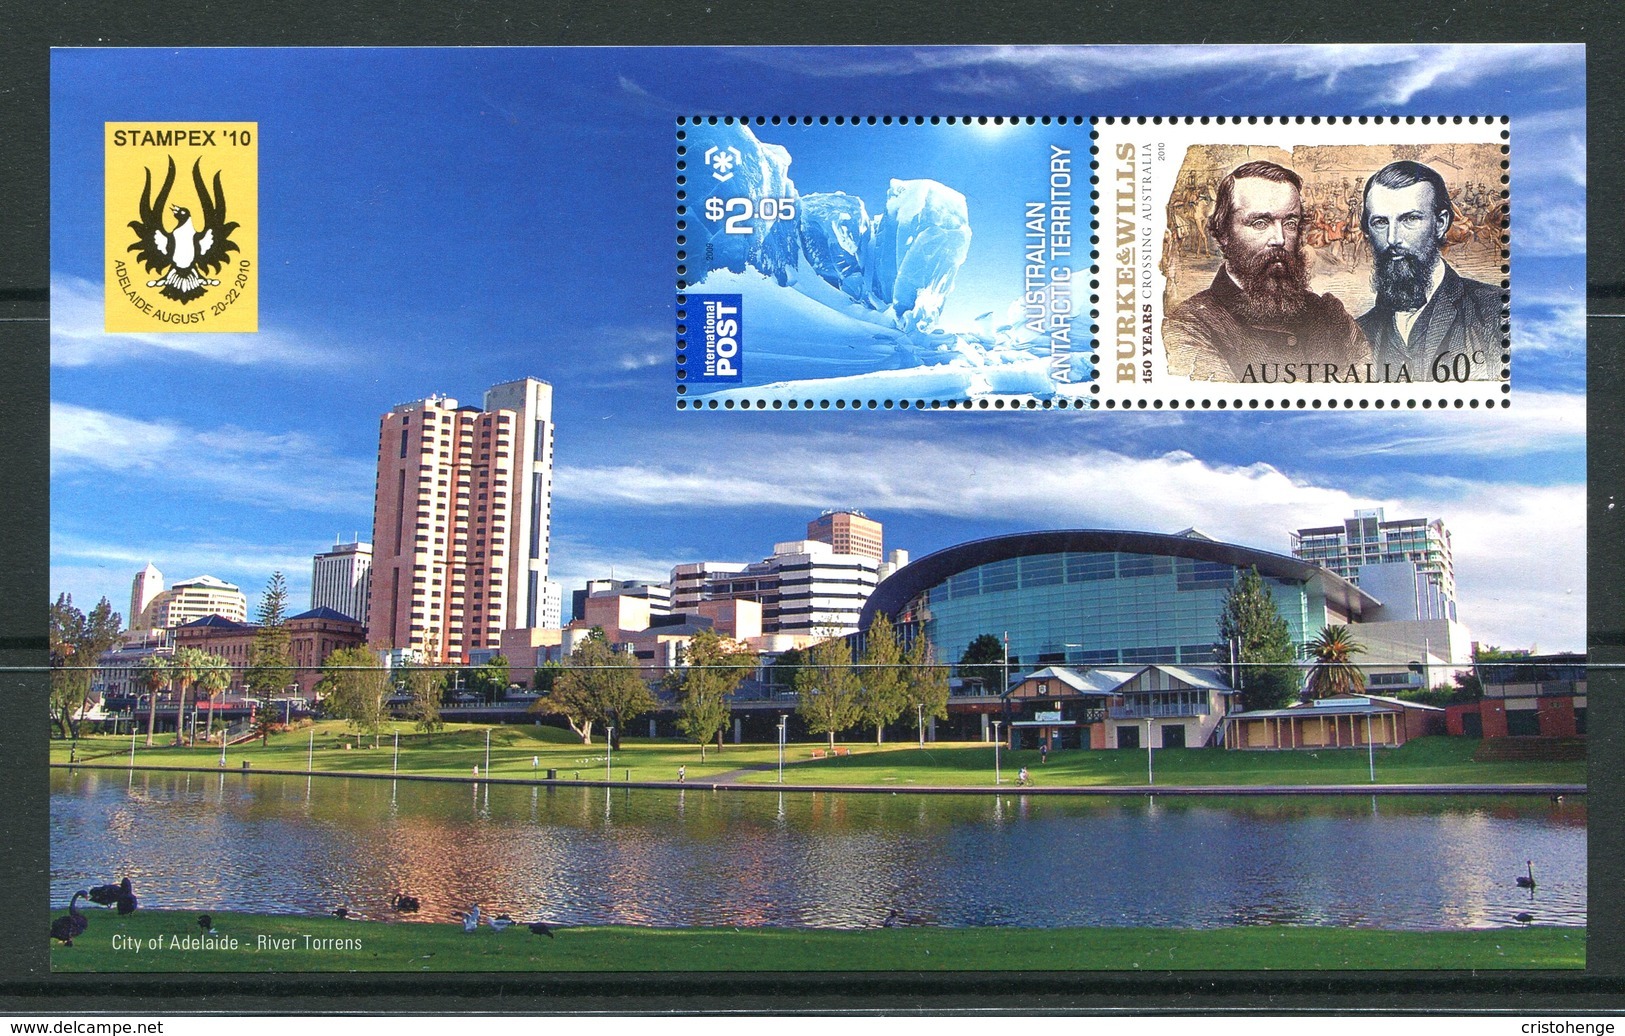 Australia 2010 Stampex '10 Stamp Exhibition MS MNH (SG MS3473) - Mint Stamps